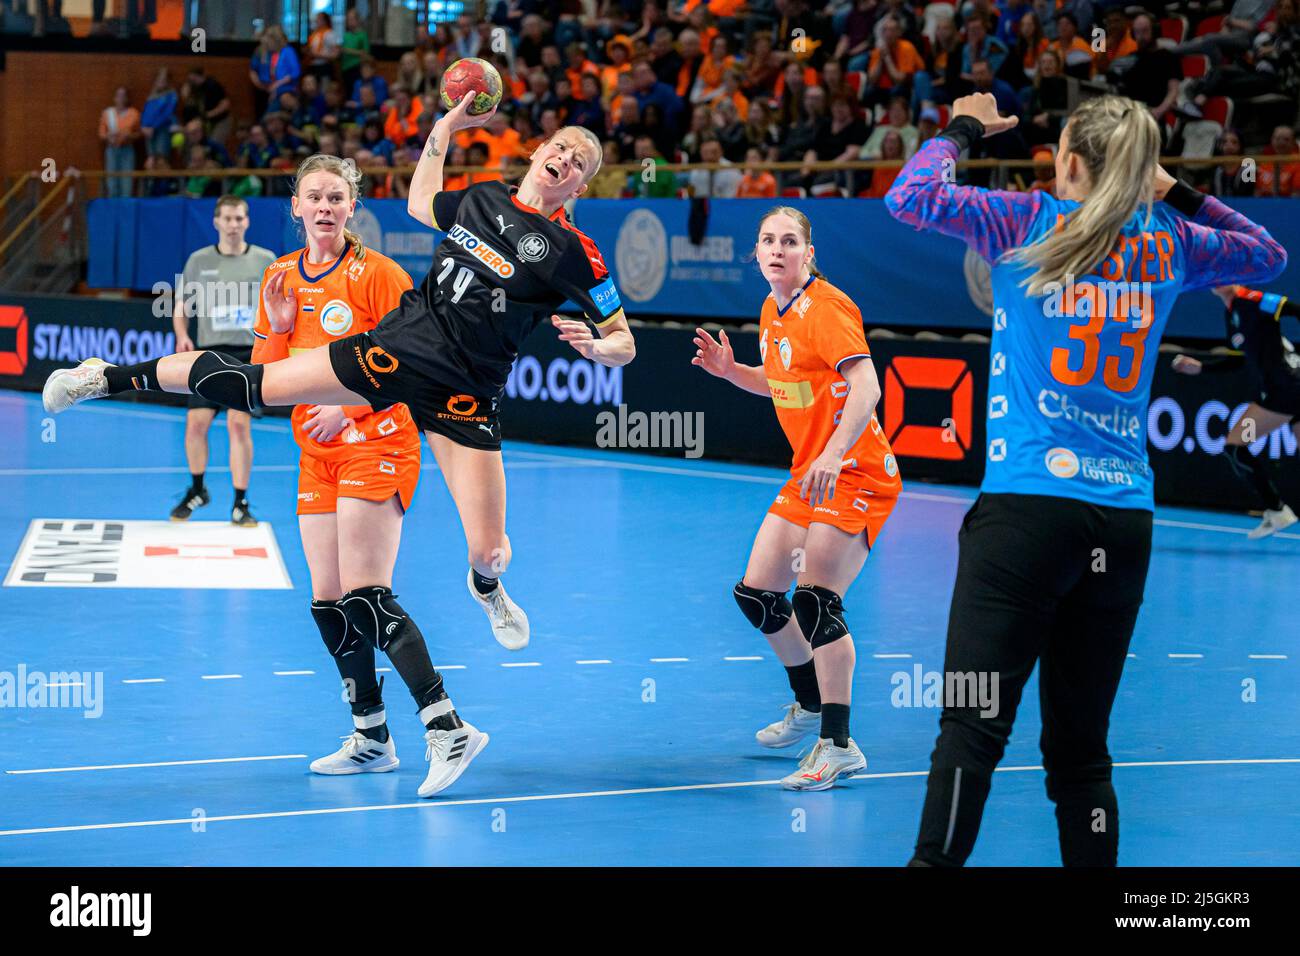 Almere, Netherlands. 23rd Apr, 2022. Handball, Women, EHF Euro, International match, Netherlands - Germany: Antje Lauenroth (Germany/Bietigheim) throws at the goal of goalkeeper Tess Wester (Netherlands). Credit: Marco Wolf/wolf-sportfoto/dpa/Alamy Live News Stock Photo